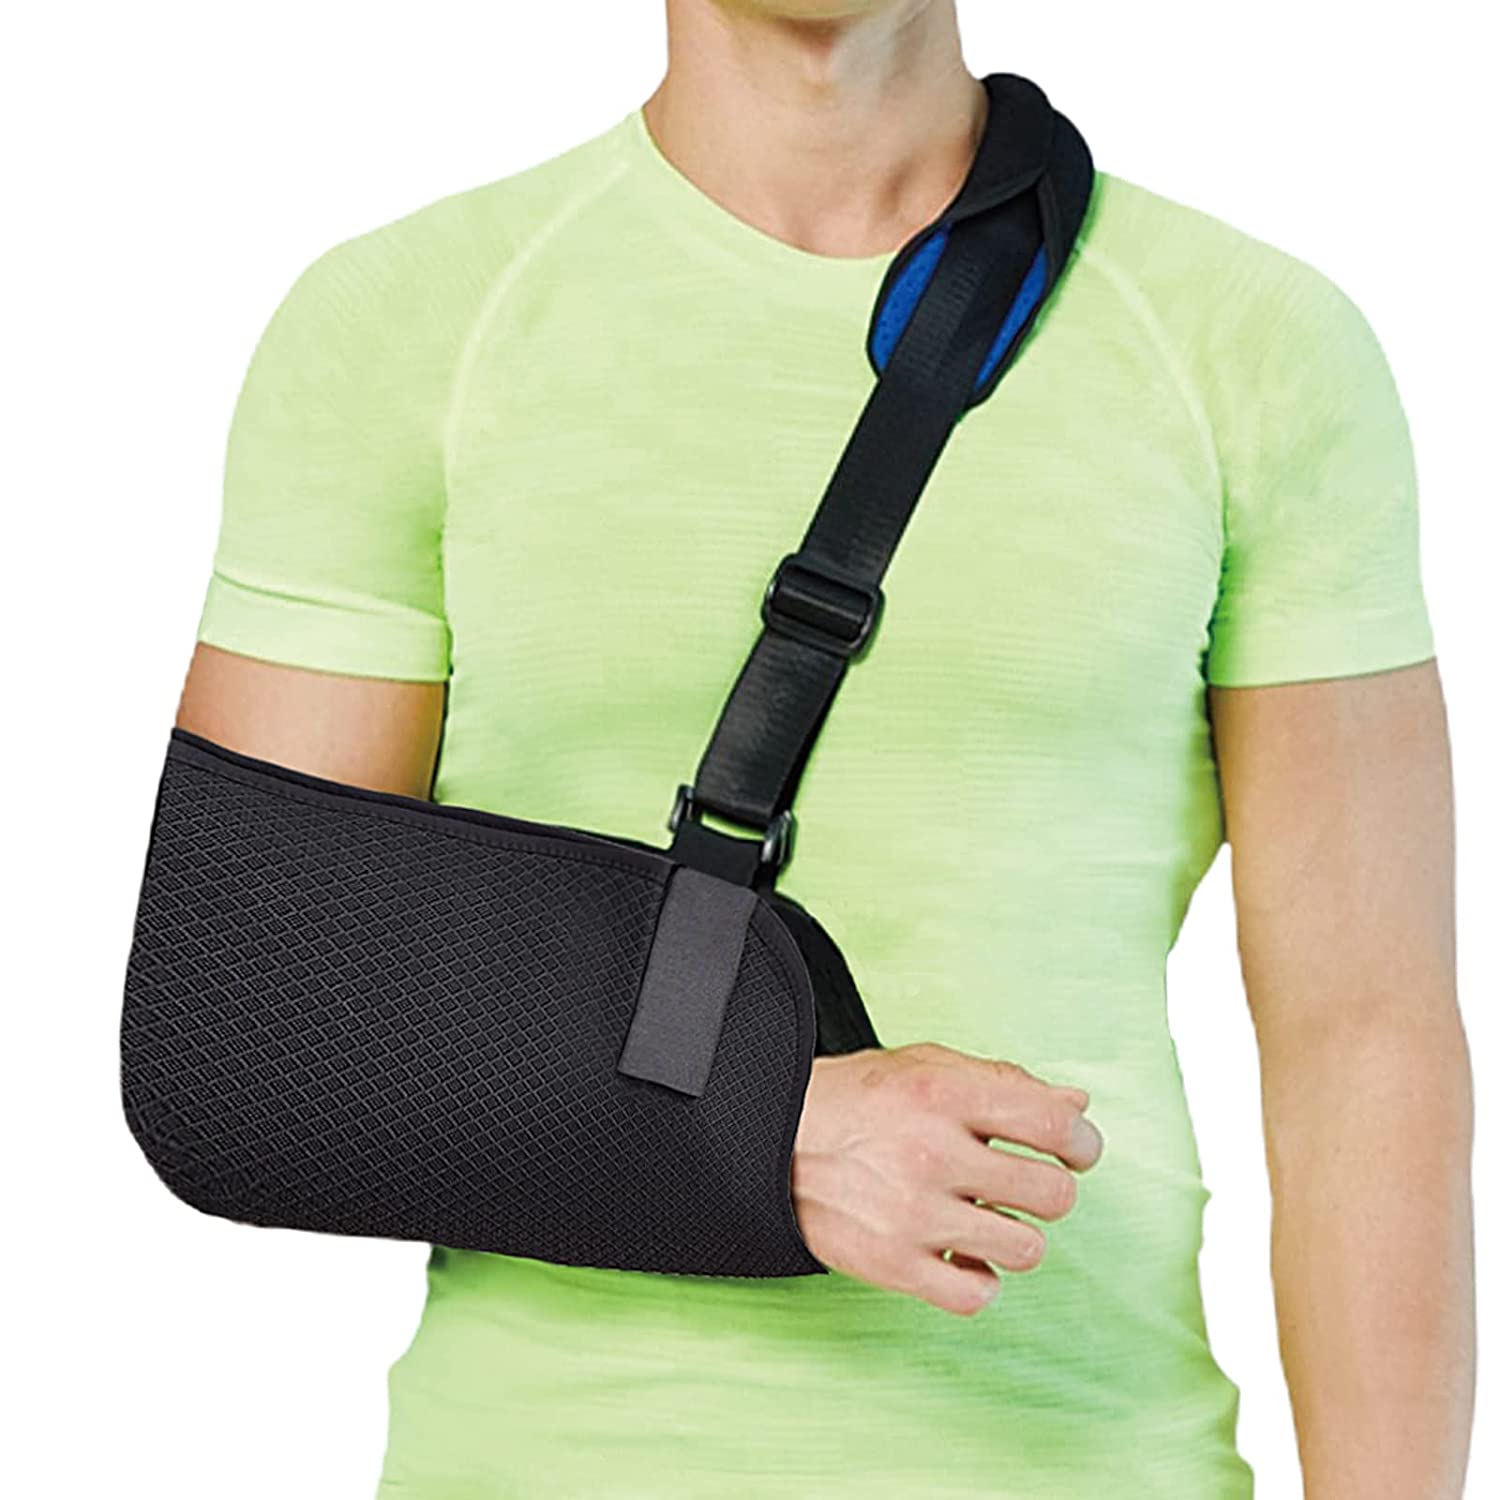 Fasola Universal Arm Sling Shoulder Immobilizer w/ Foam Neck Pad Size Small RRP 12.99 CLEARANCE XL 9.99